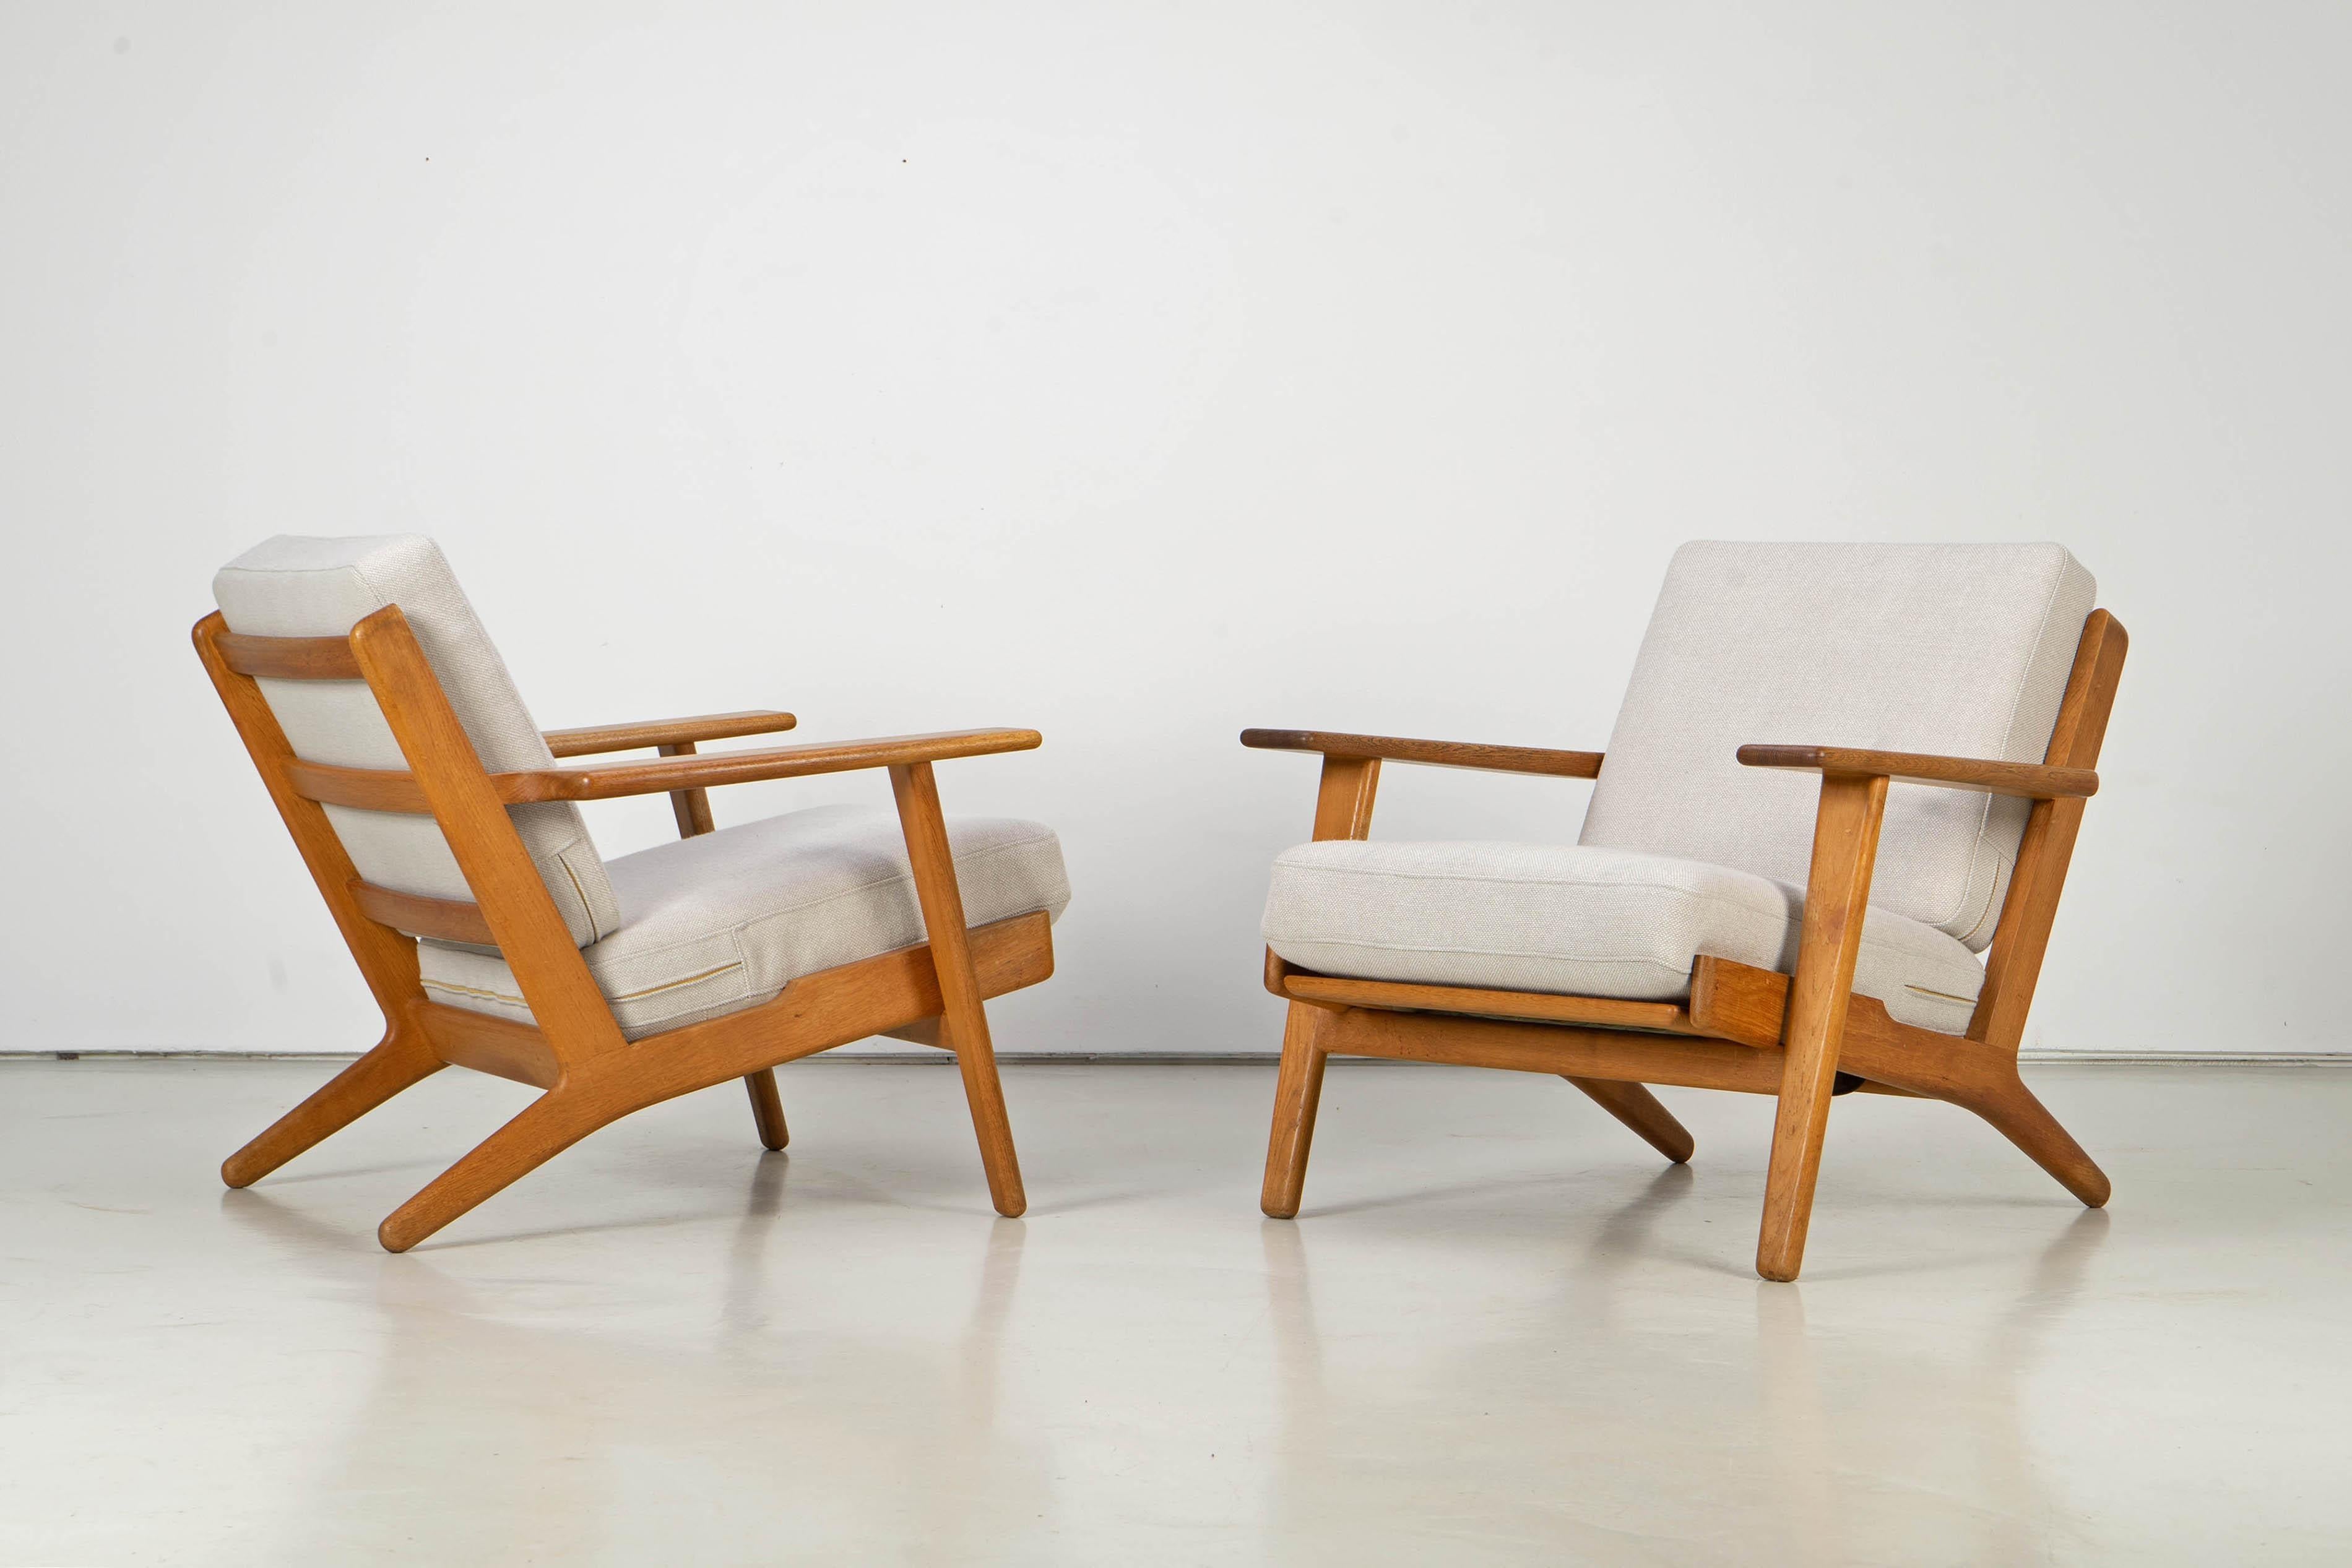 Oak wood easy chairs designed by Hans Wegner for GETAMA, Denmark. The chairs havee been newly upholstered with 